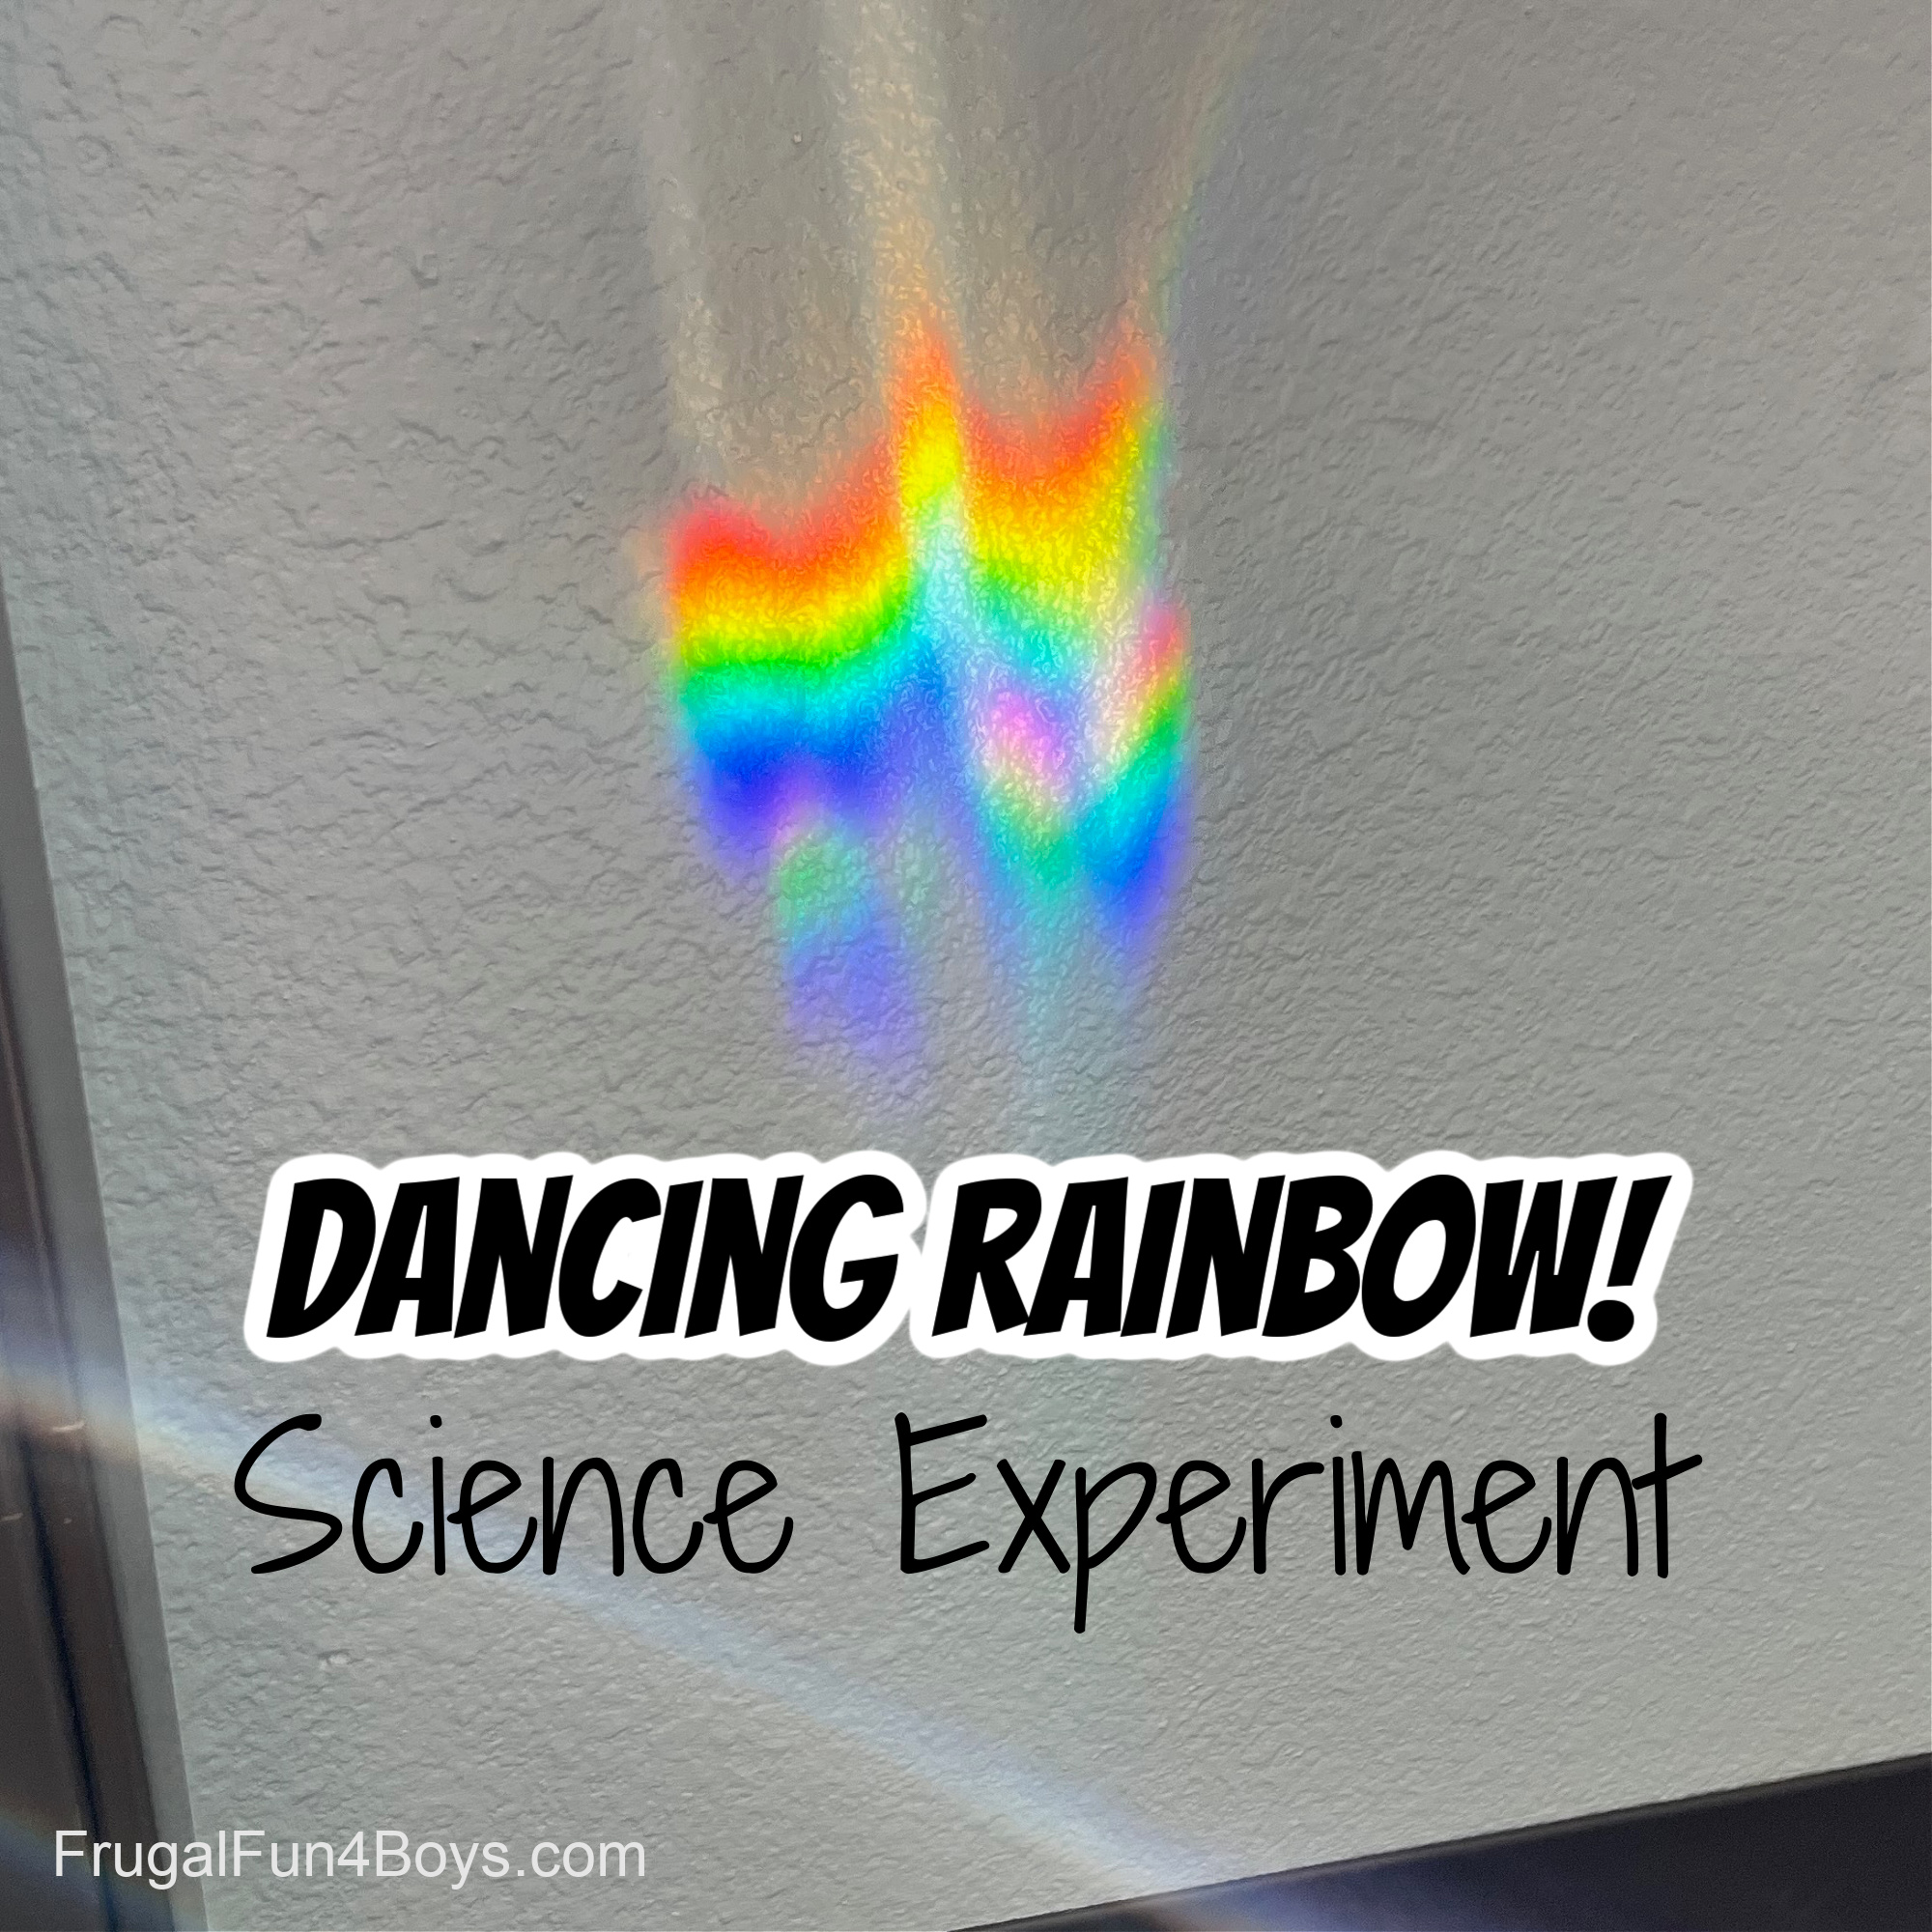 Dancing Rainbow Science Experiment - Make a rainbow with a mirror and water